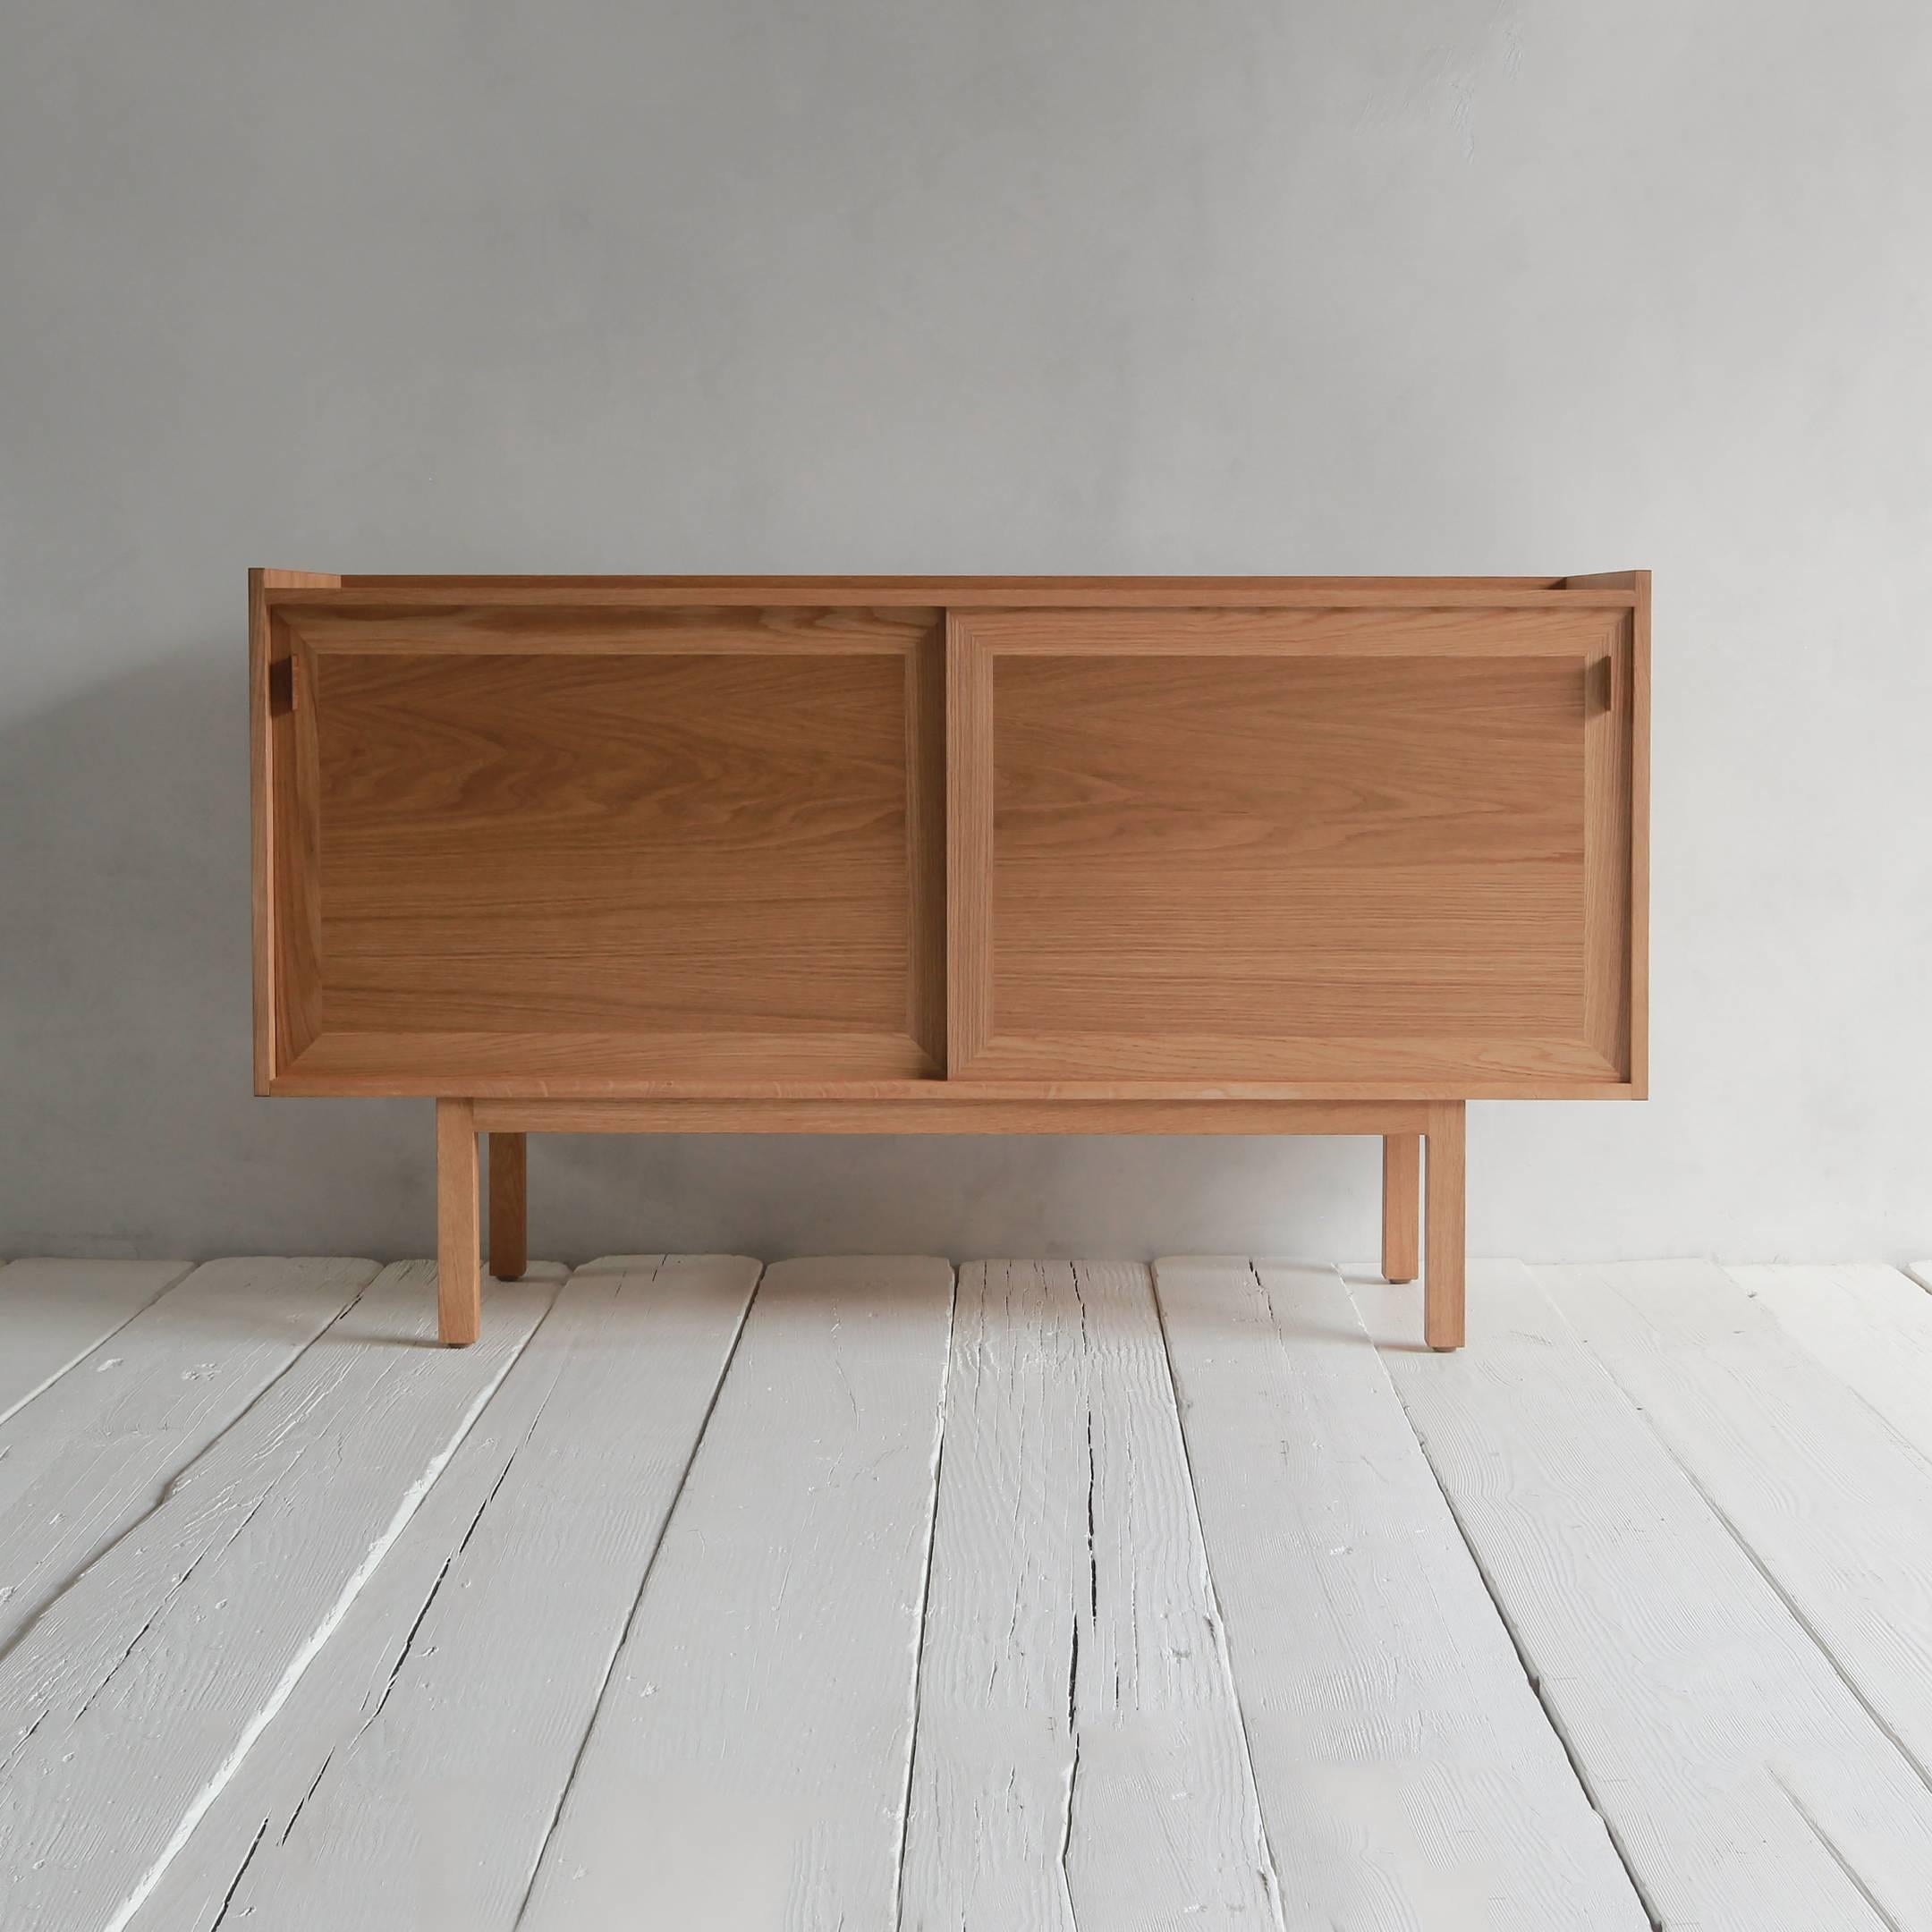 Handsome storage with modern proportions and a tribute to Scandinavian design, our credenza is a Classic addition to a furniture collection. Interior cabinets include adjustable shelves and three felt-lined open drawers. Made in Los Angeles.